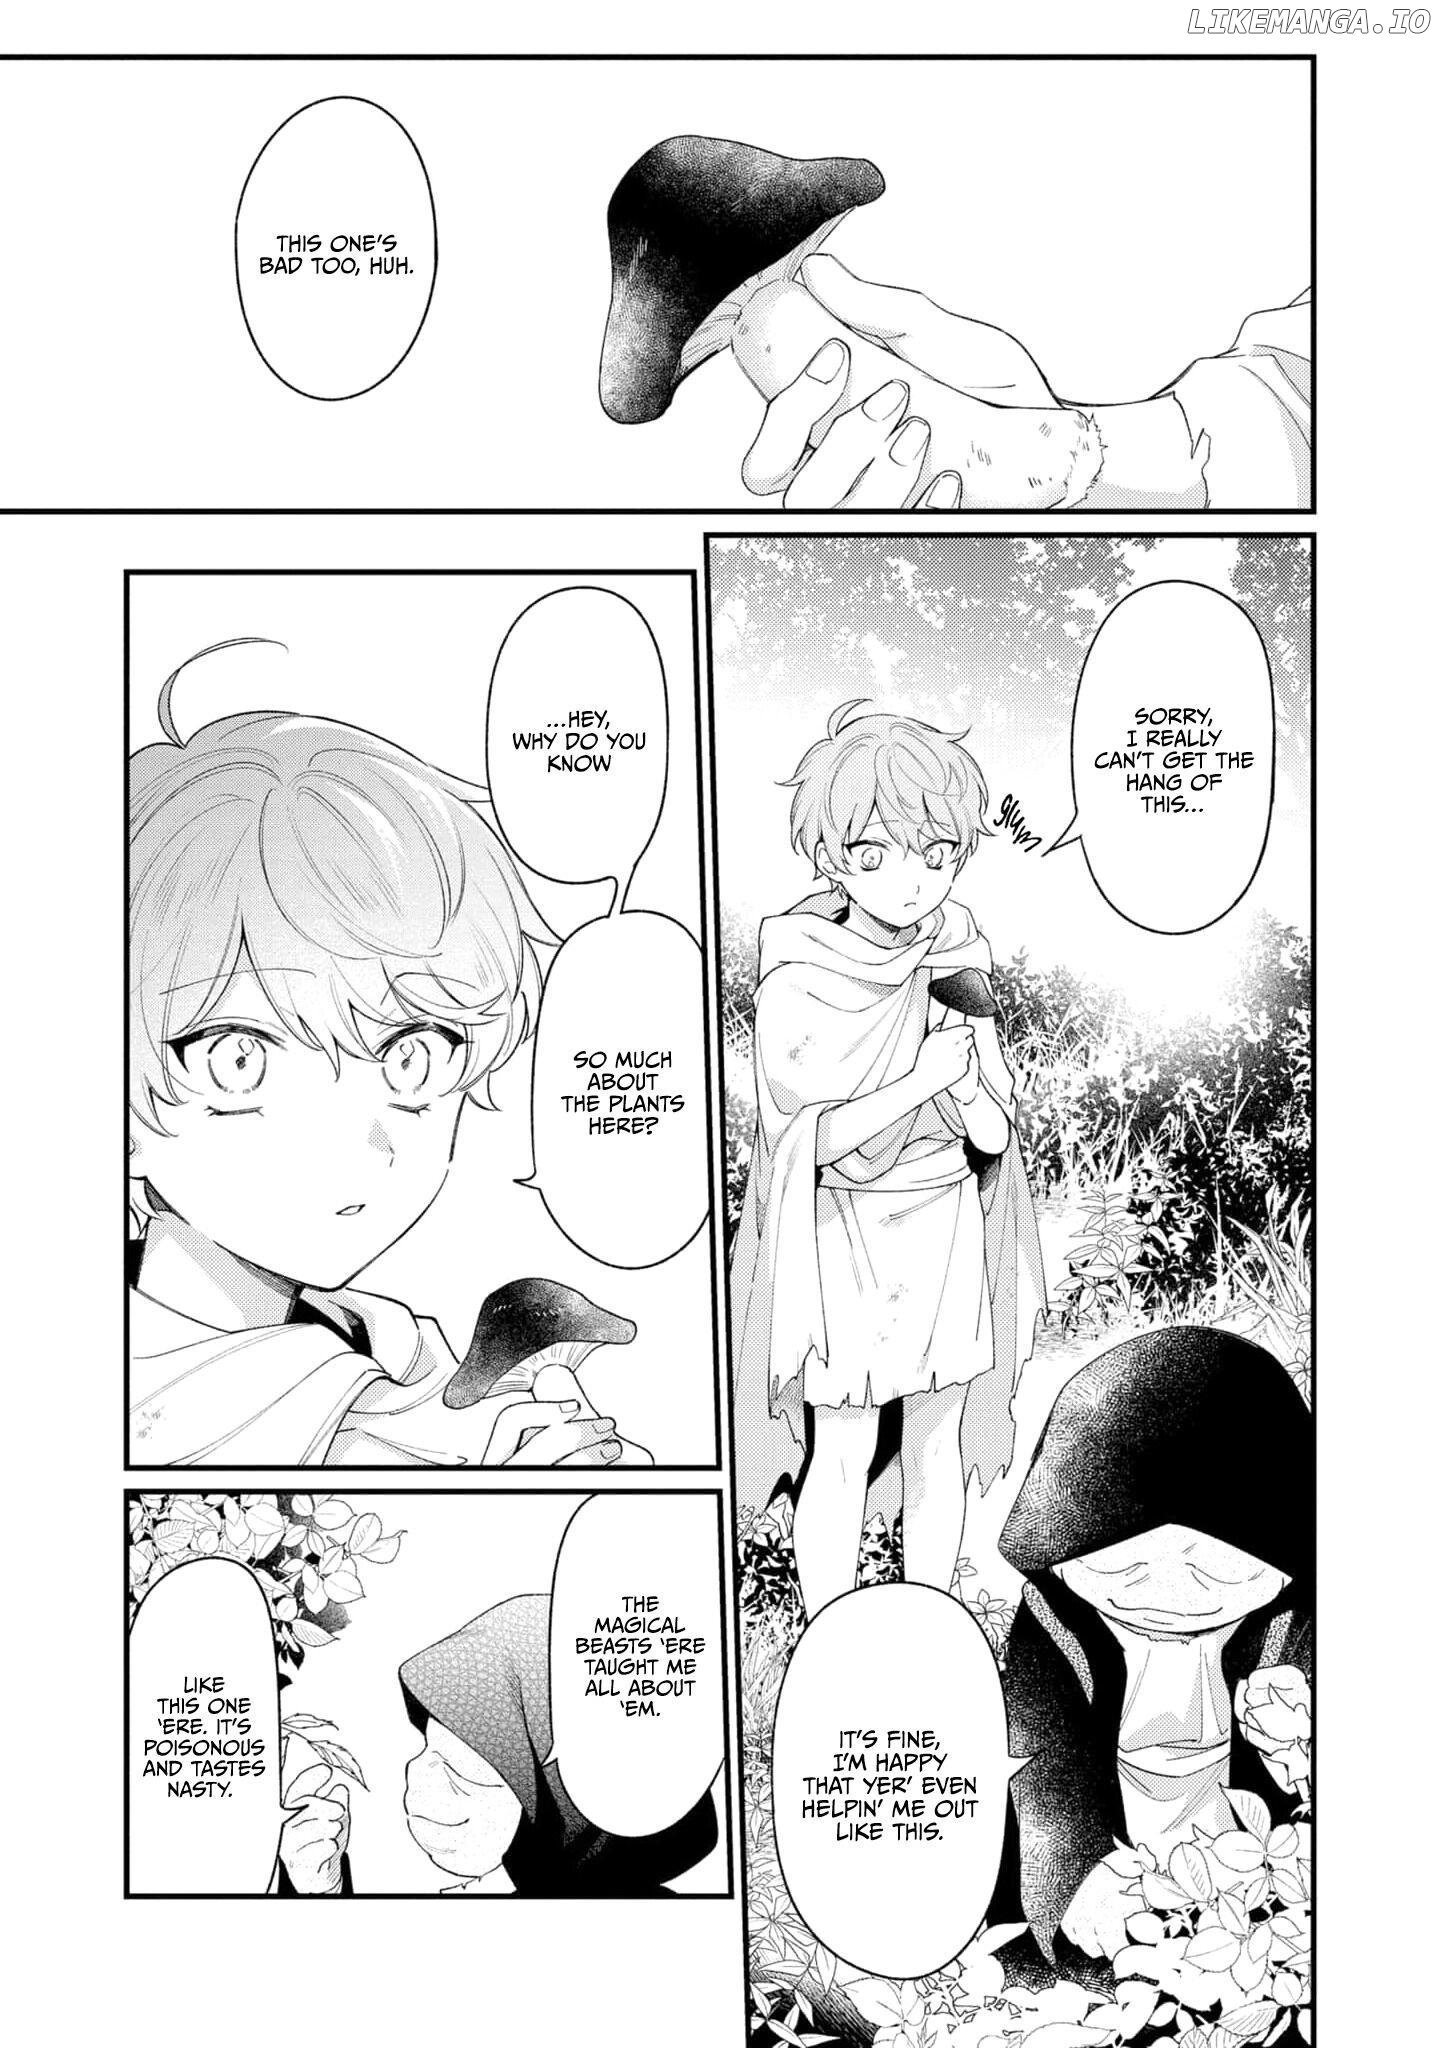 The Silent Daughter of a Duke and the Cold Emperor ~ The Child I Found in My Past Life Became the Emperor ~ Chapter 3 - page 5